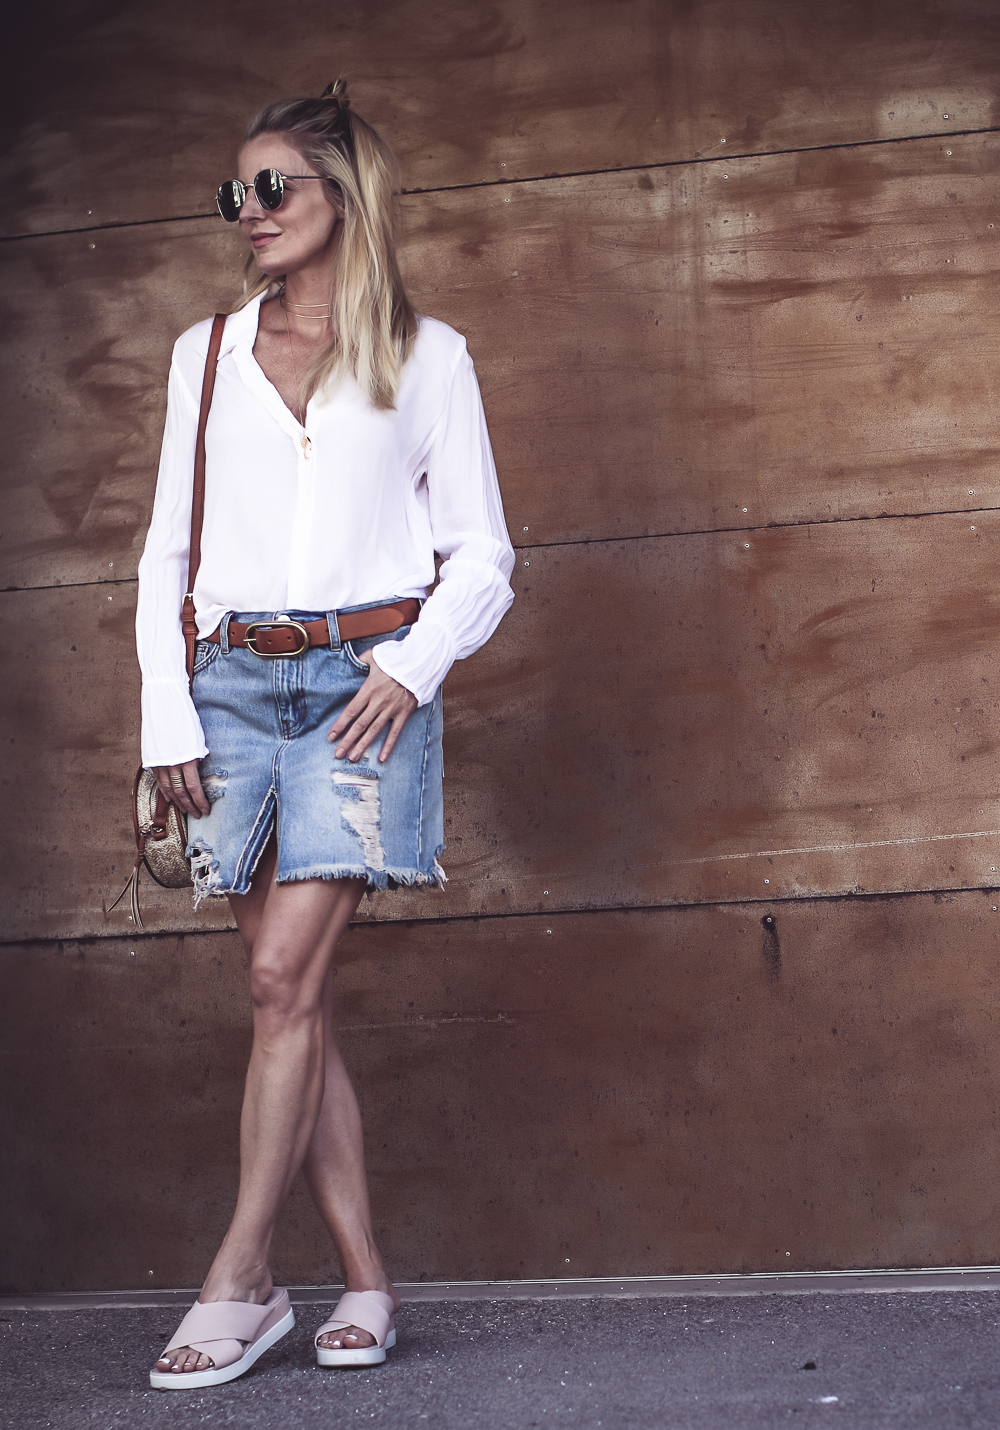 Comfortable sandals, slides by ECCO on blonde woman wearing distressed denim skirt by Free People and white button down shirt by Bella Dahl